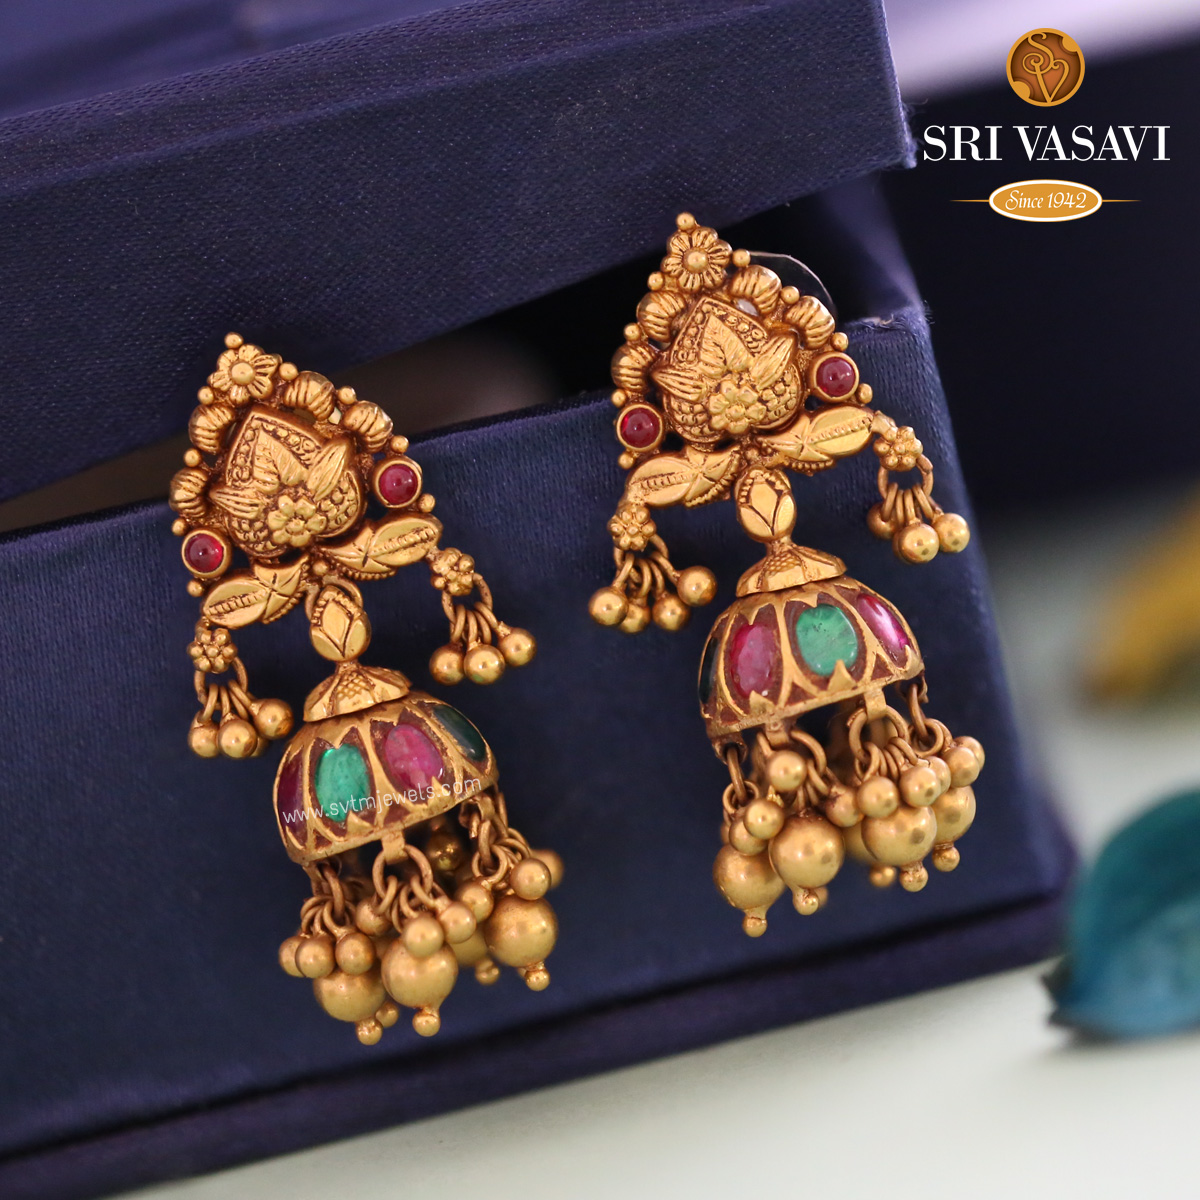 Buy Gold Earrings Online Latest Gold Earrings Designs,Affordable Low Cost Simple Indian Bathroom Designs